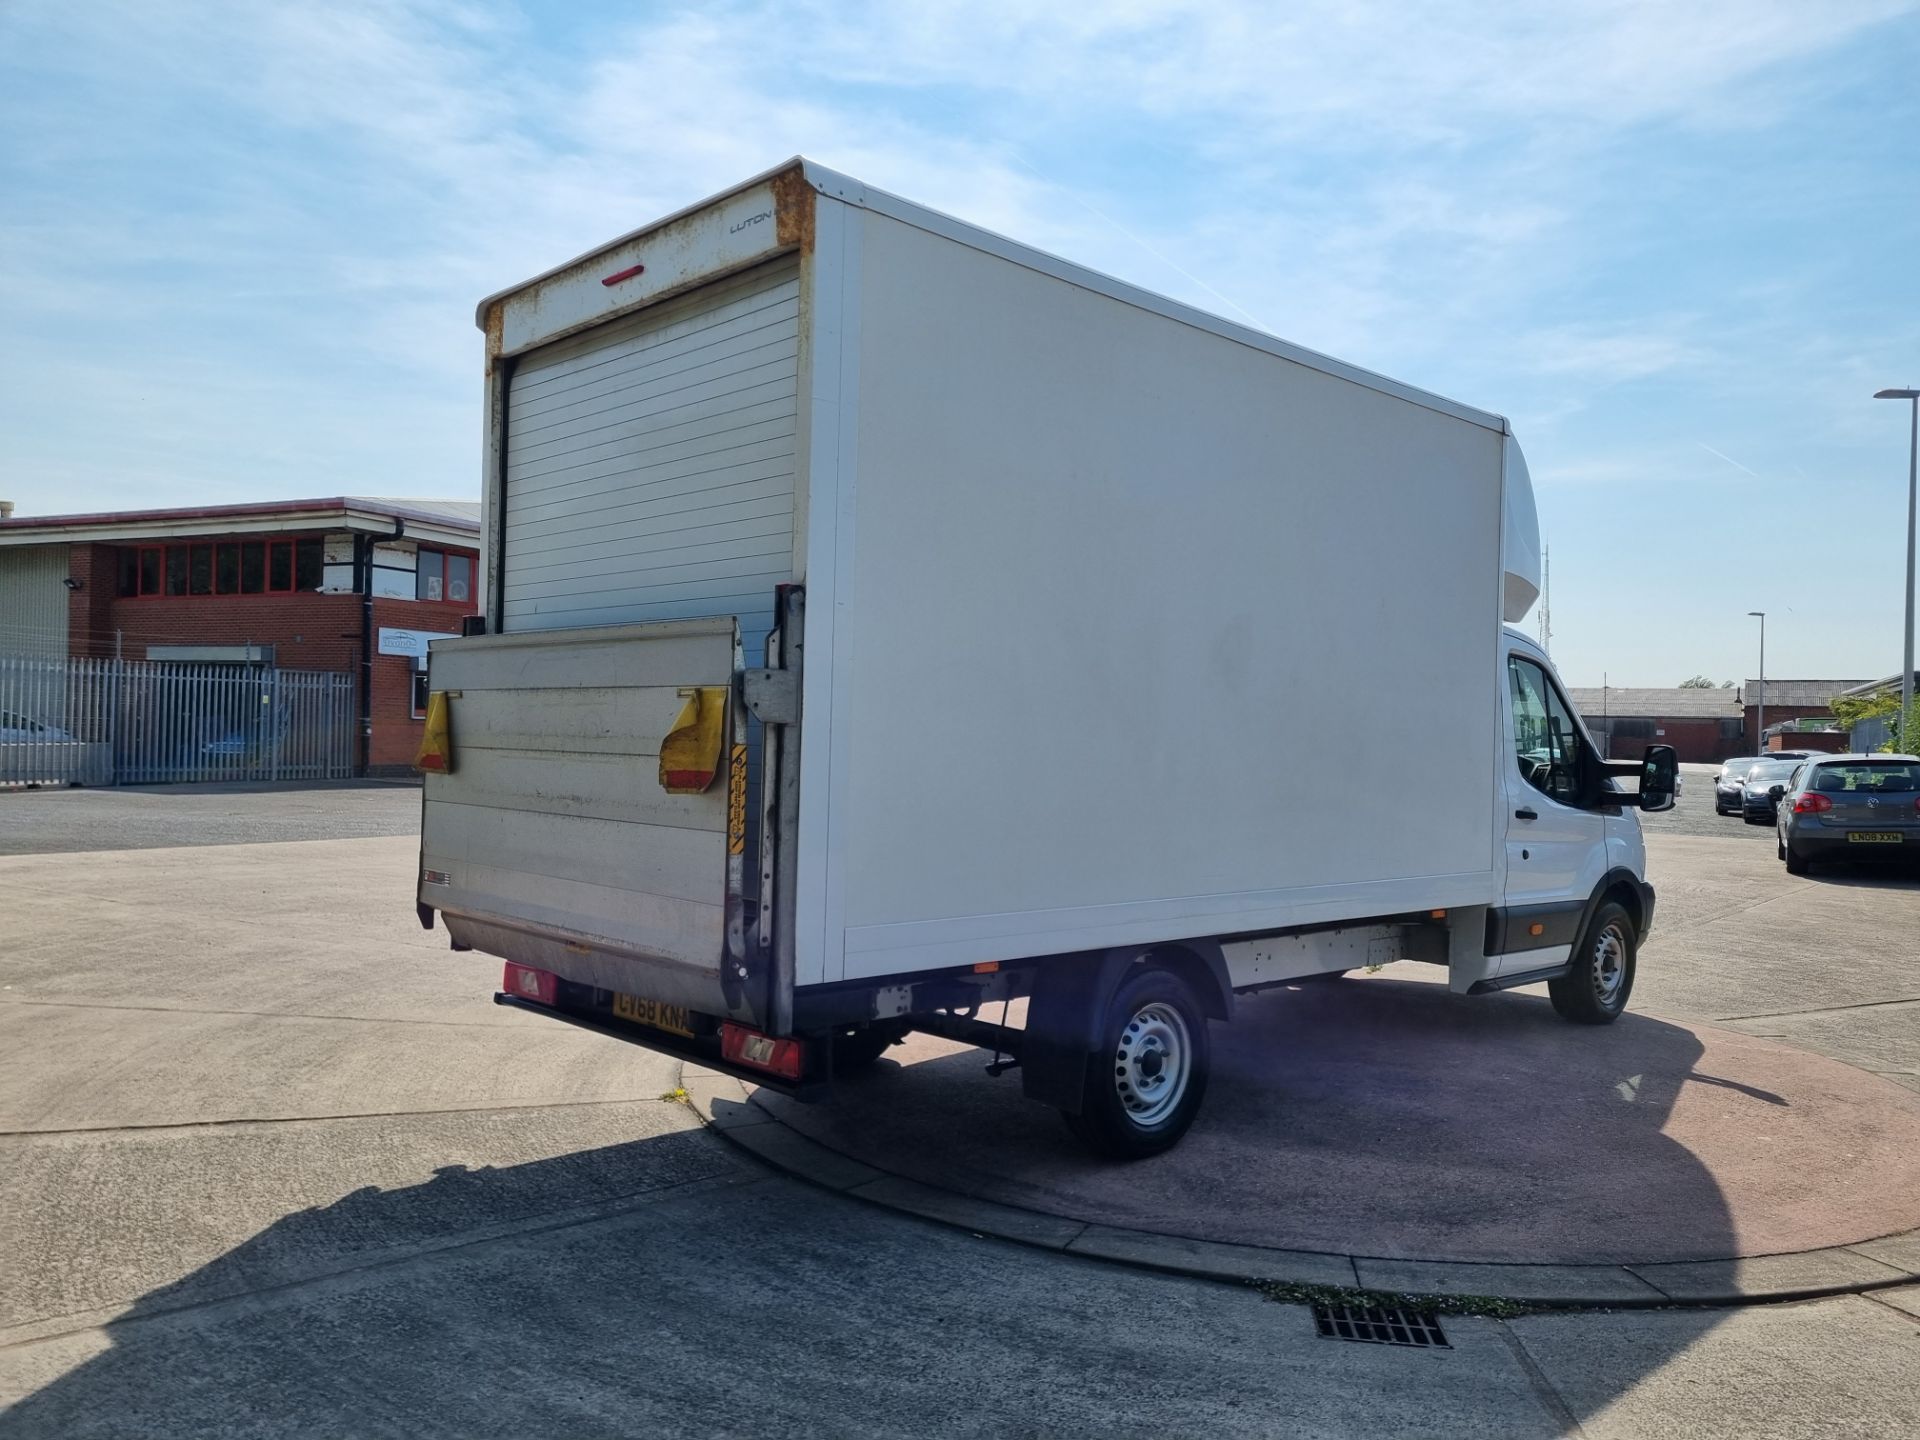 2018 Transit Luton with tail lift - Image 5 of 14